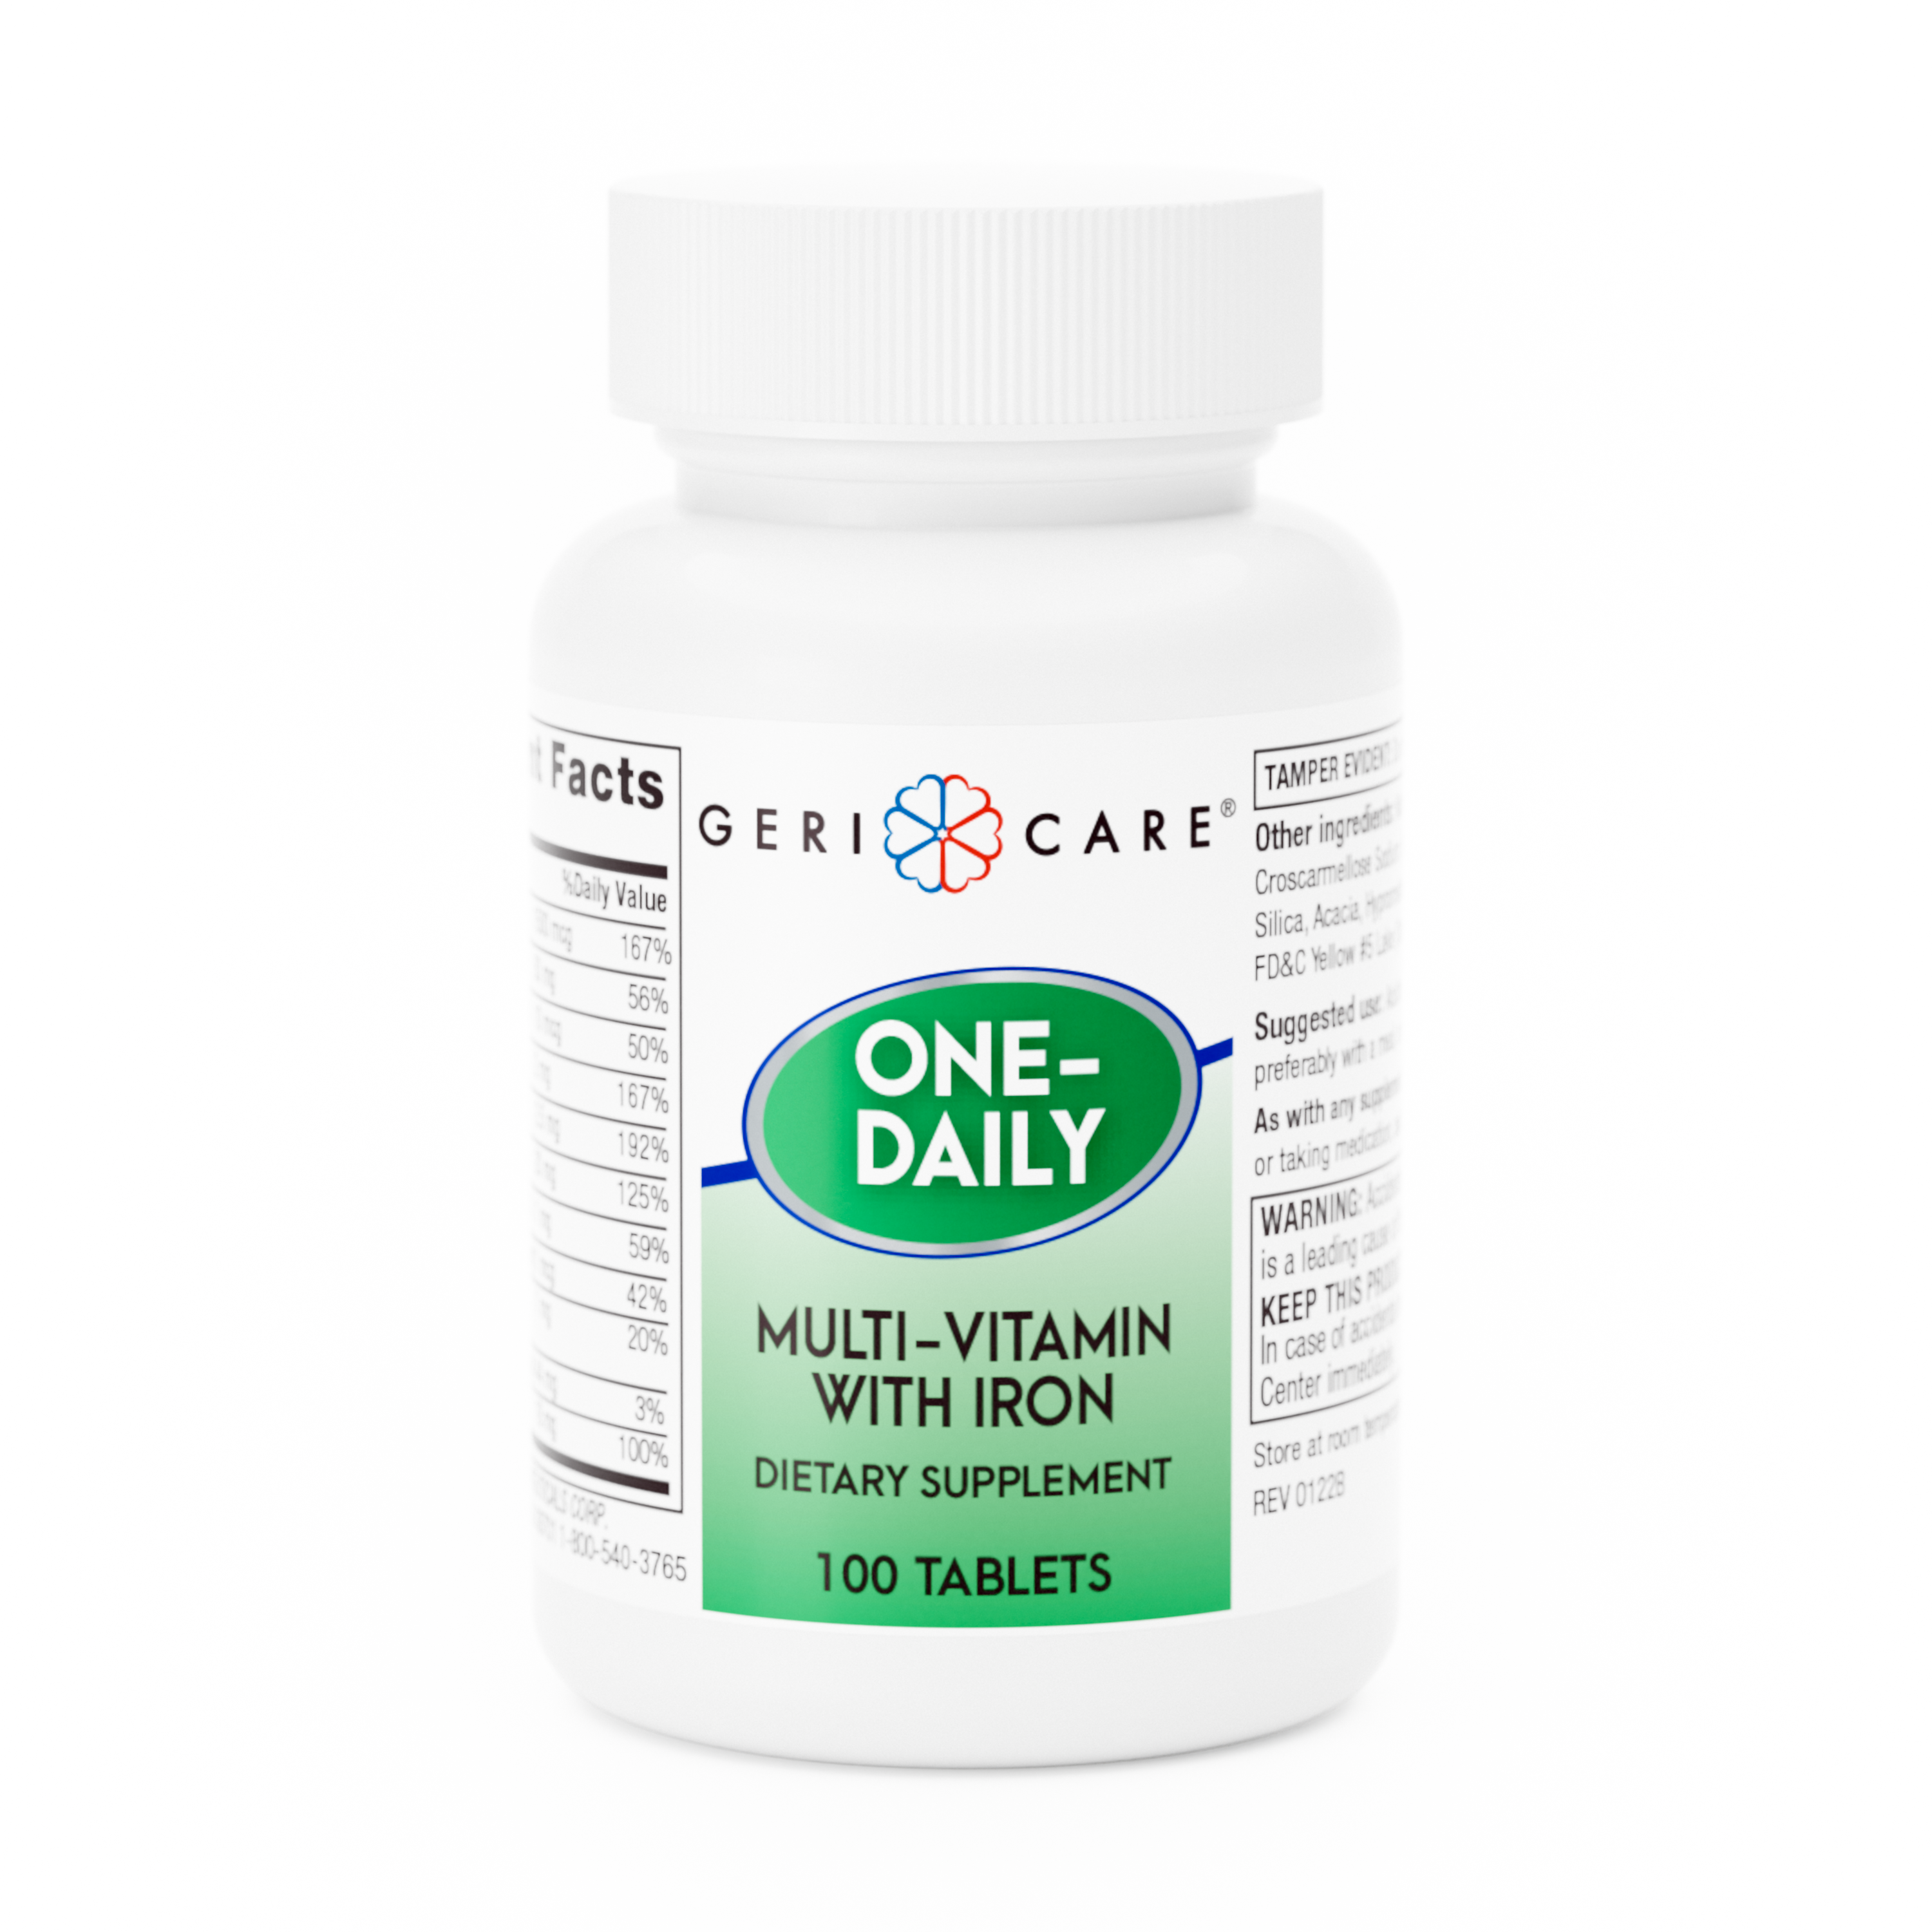 One-Daily Multi-Vitamin + Iron – 100 Tablets